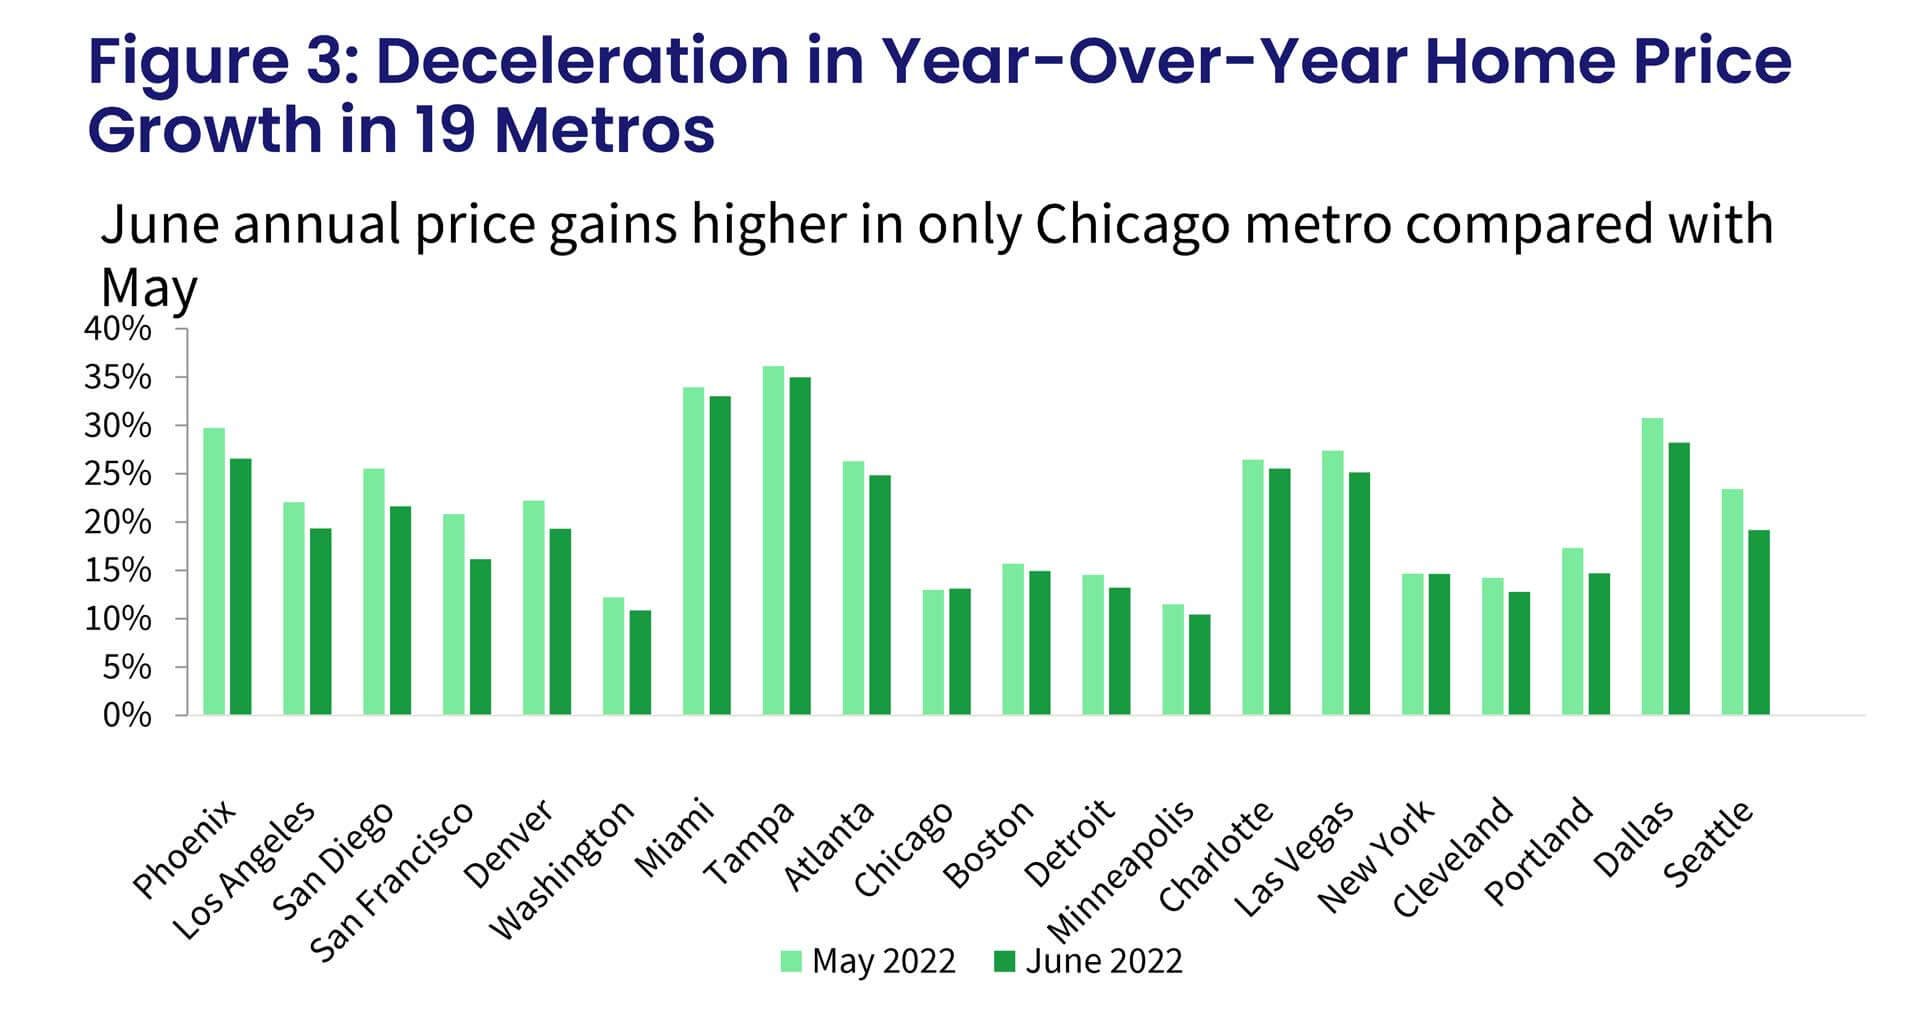 Figure 3: Deceleration in Year-Over-Year Home Price Growth in 19 Metros